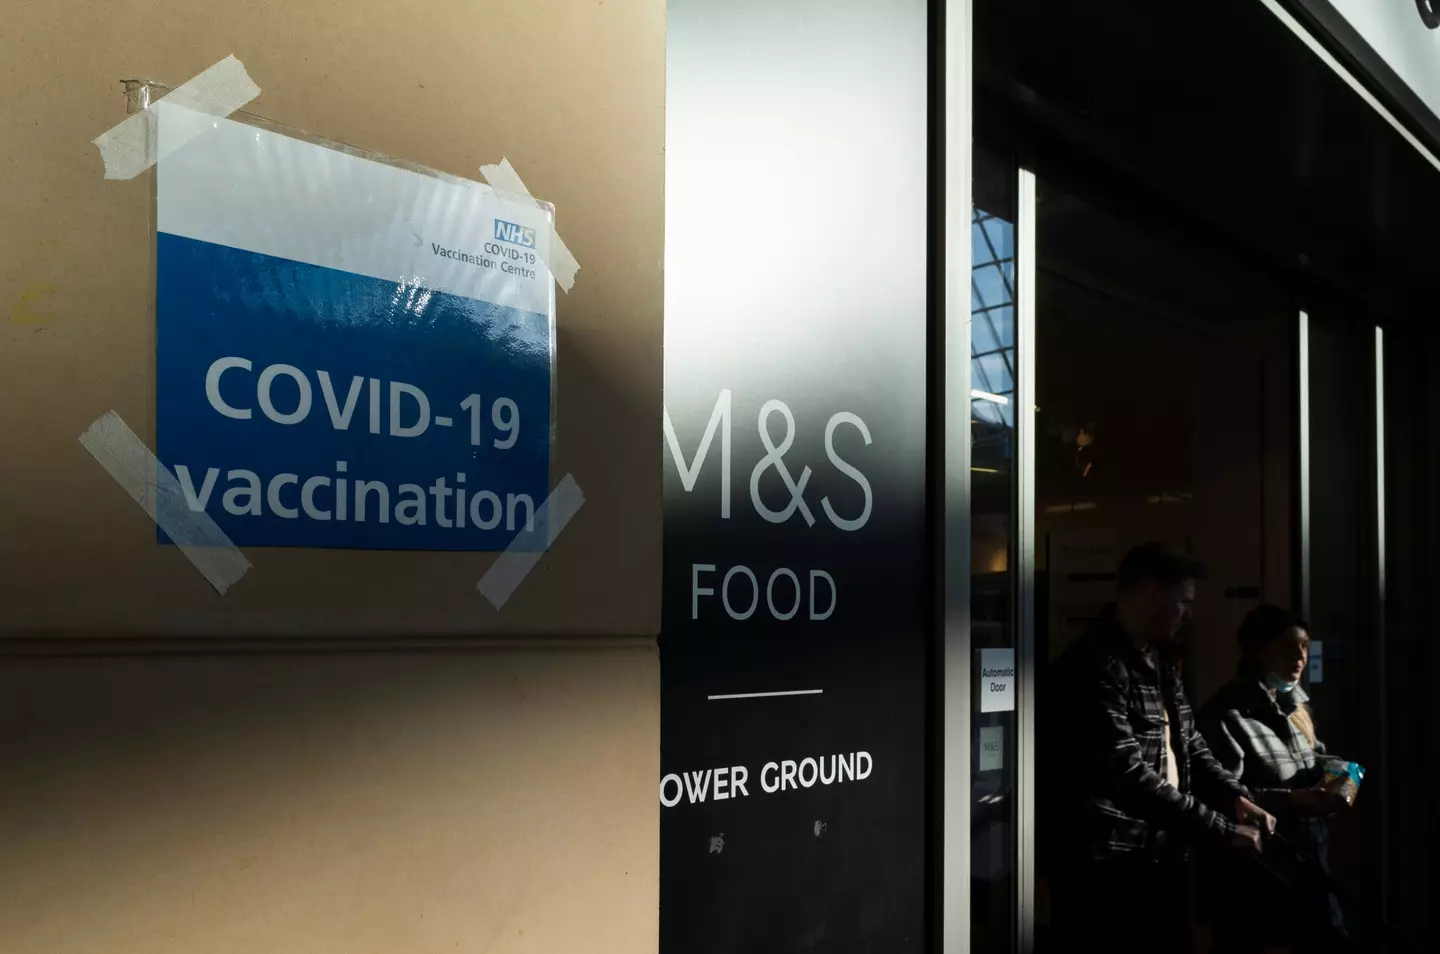 The NHS took charge of the Covid-19 vaccine rollout, with great success.